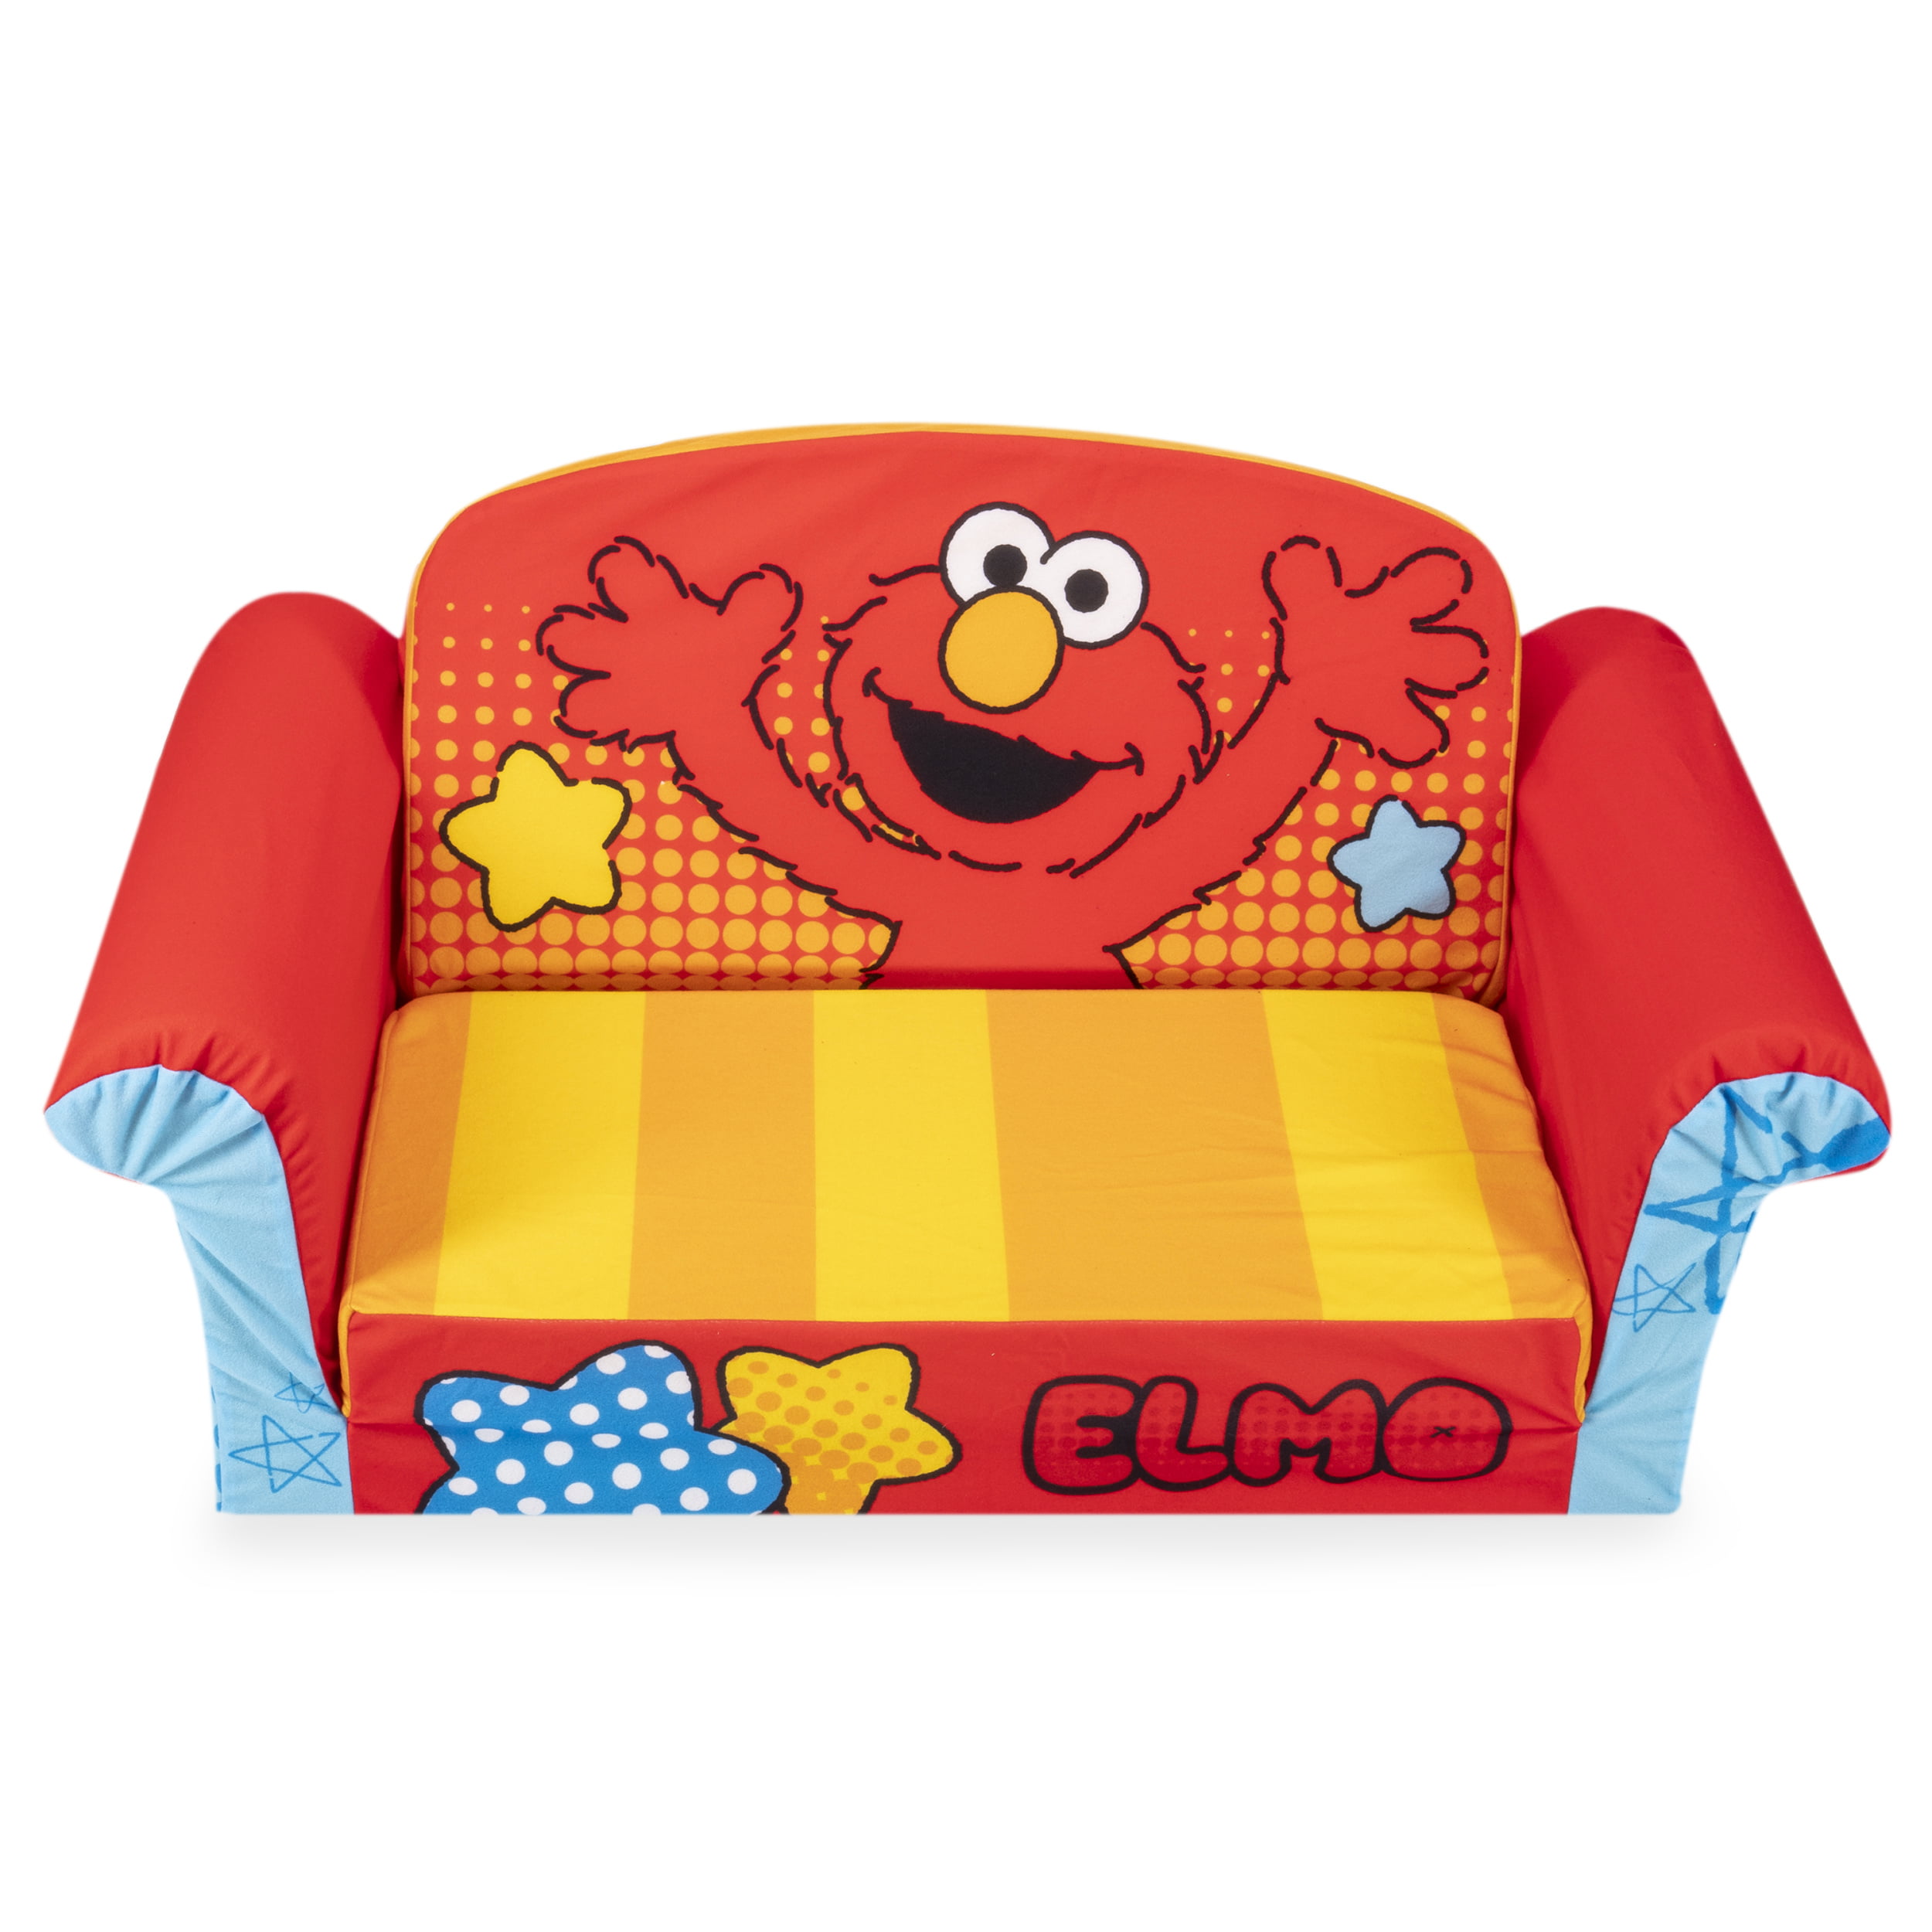 Nickelodeon Paw Patrol Childrens 2 in 1 Flip Open Foam Sofa Marshmallow Furniture by Spin Master